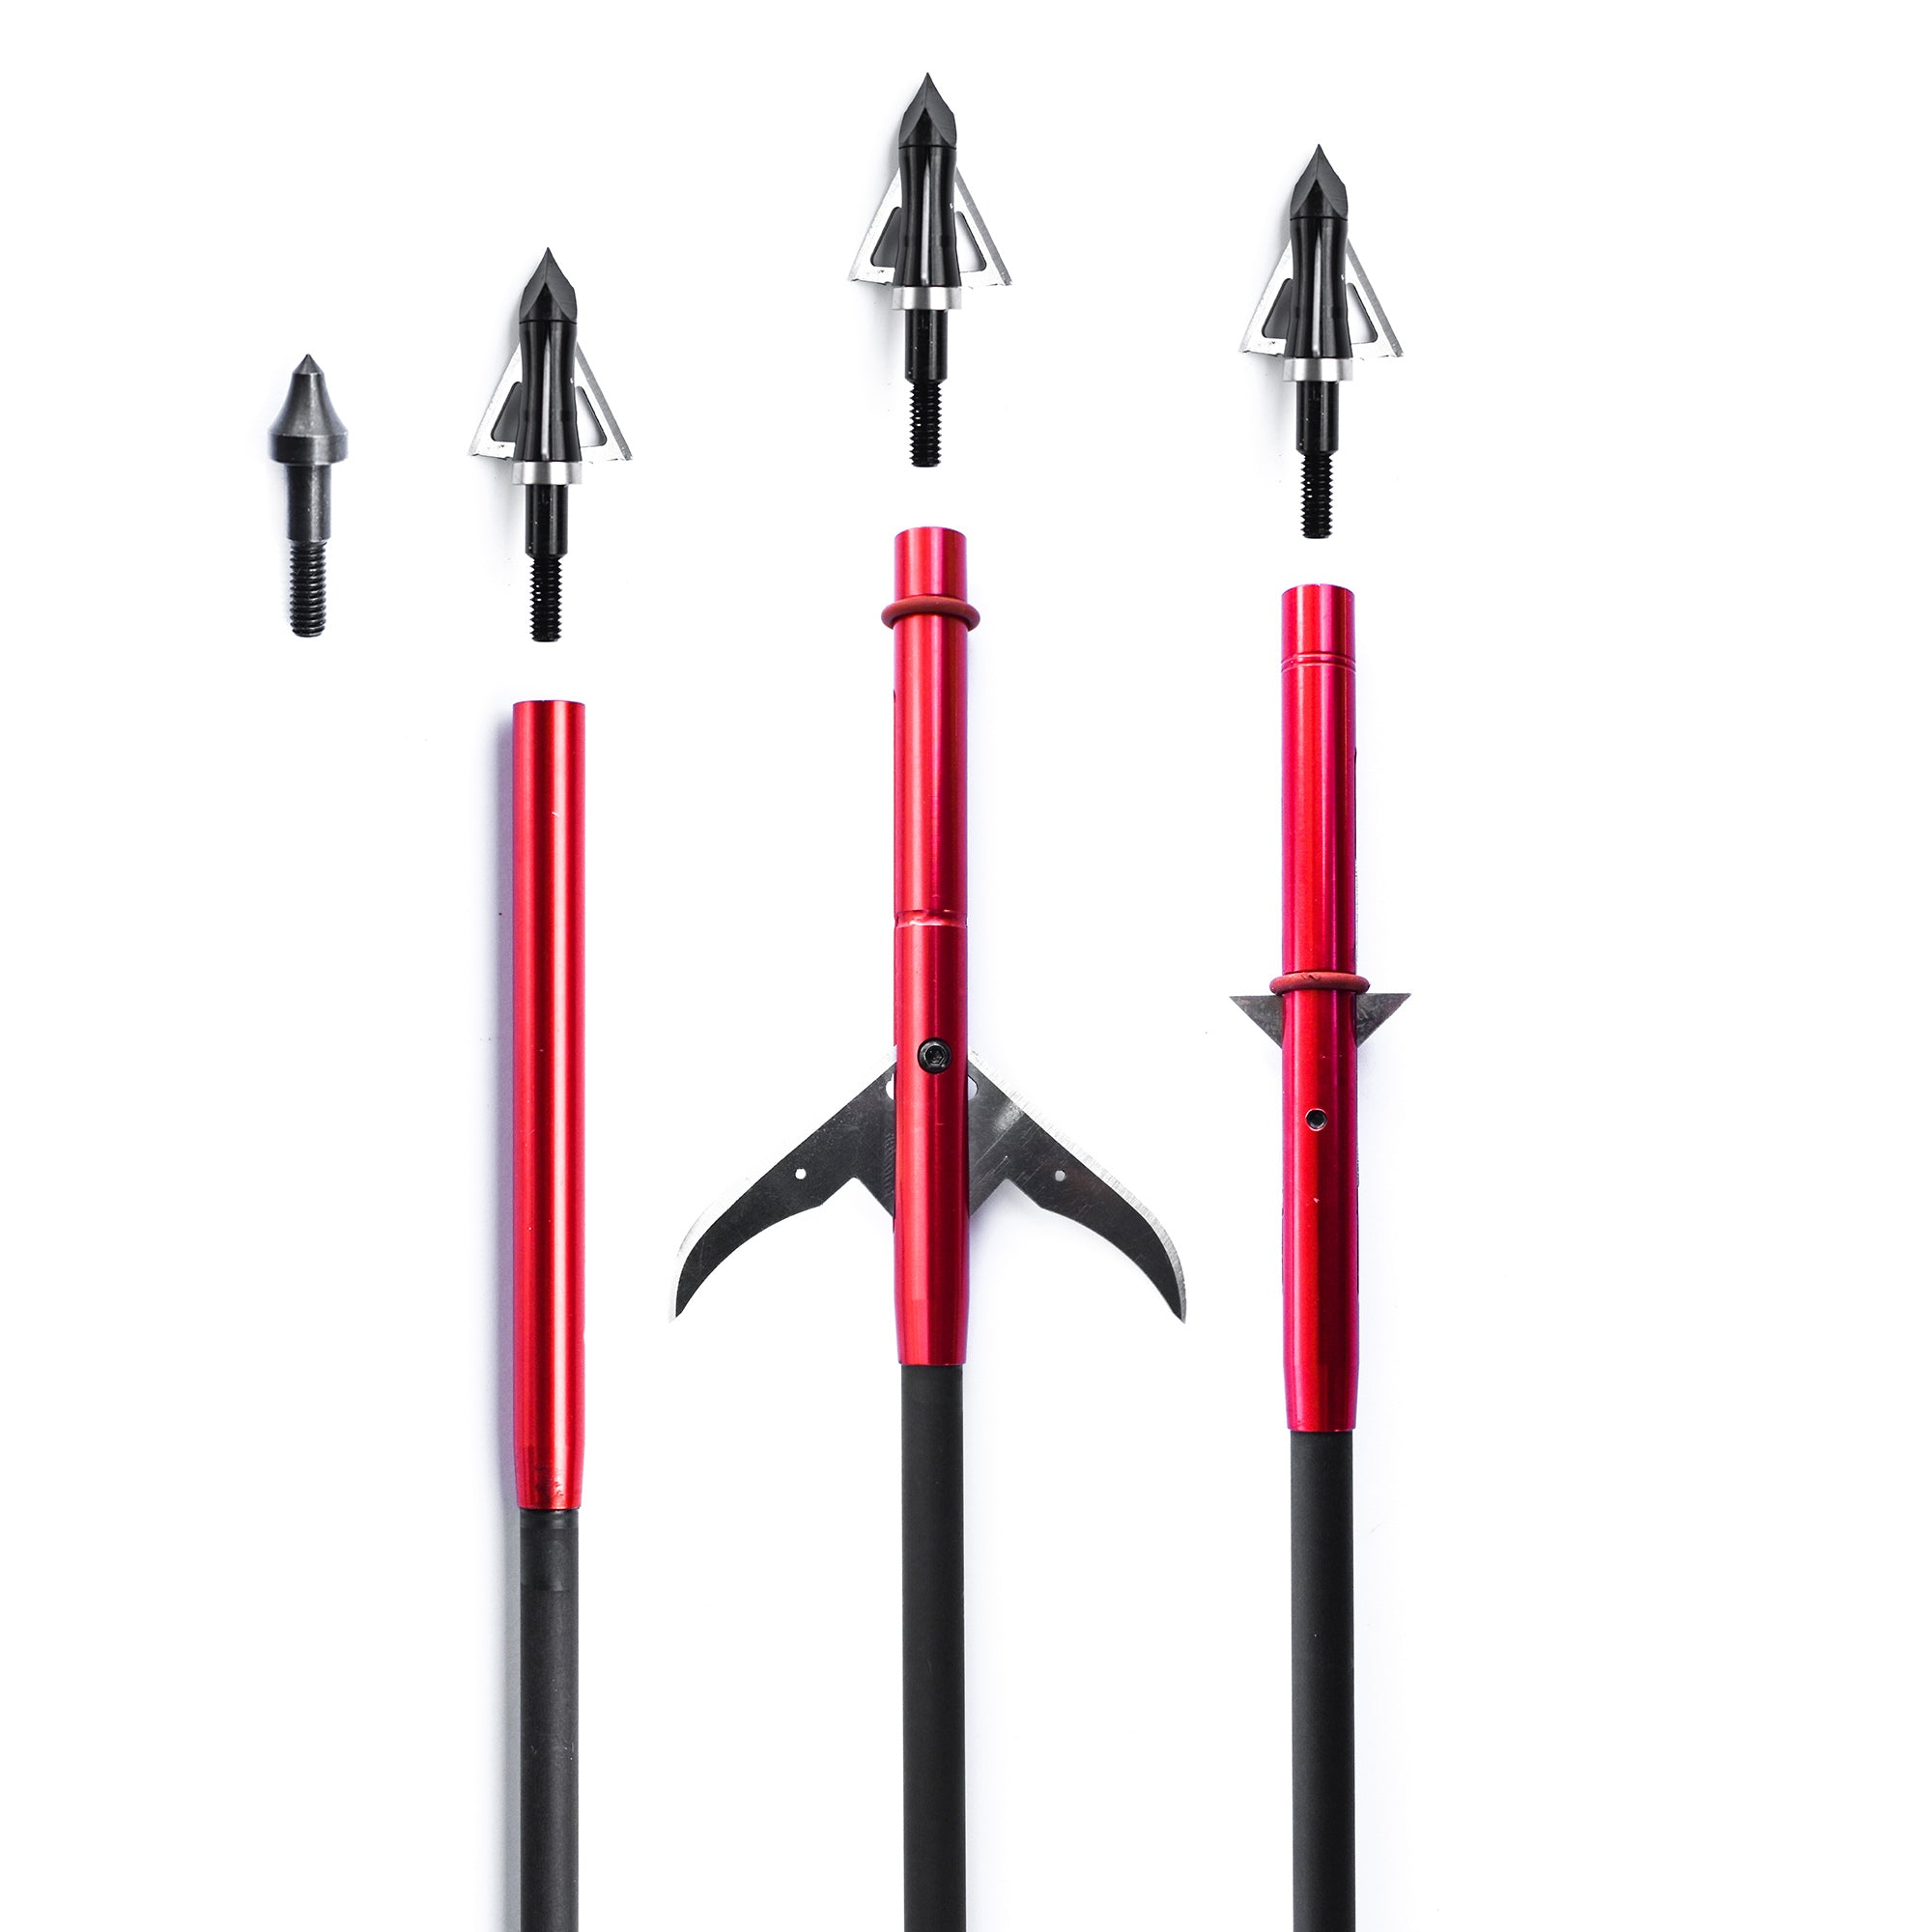 3 SLASH® MAGNUM 300 HUNTING ARROWS, 2 are INsetBlade®